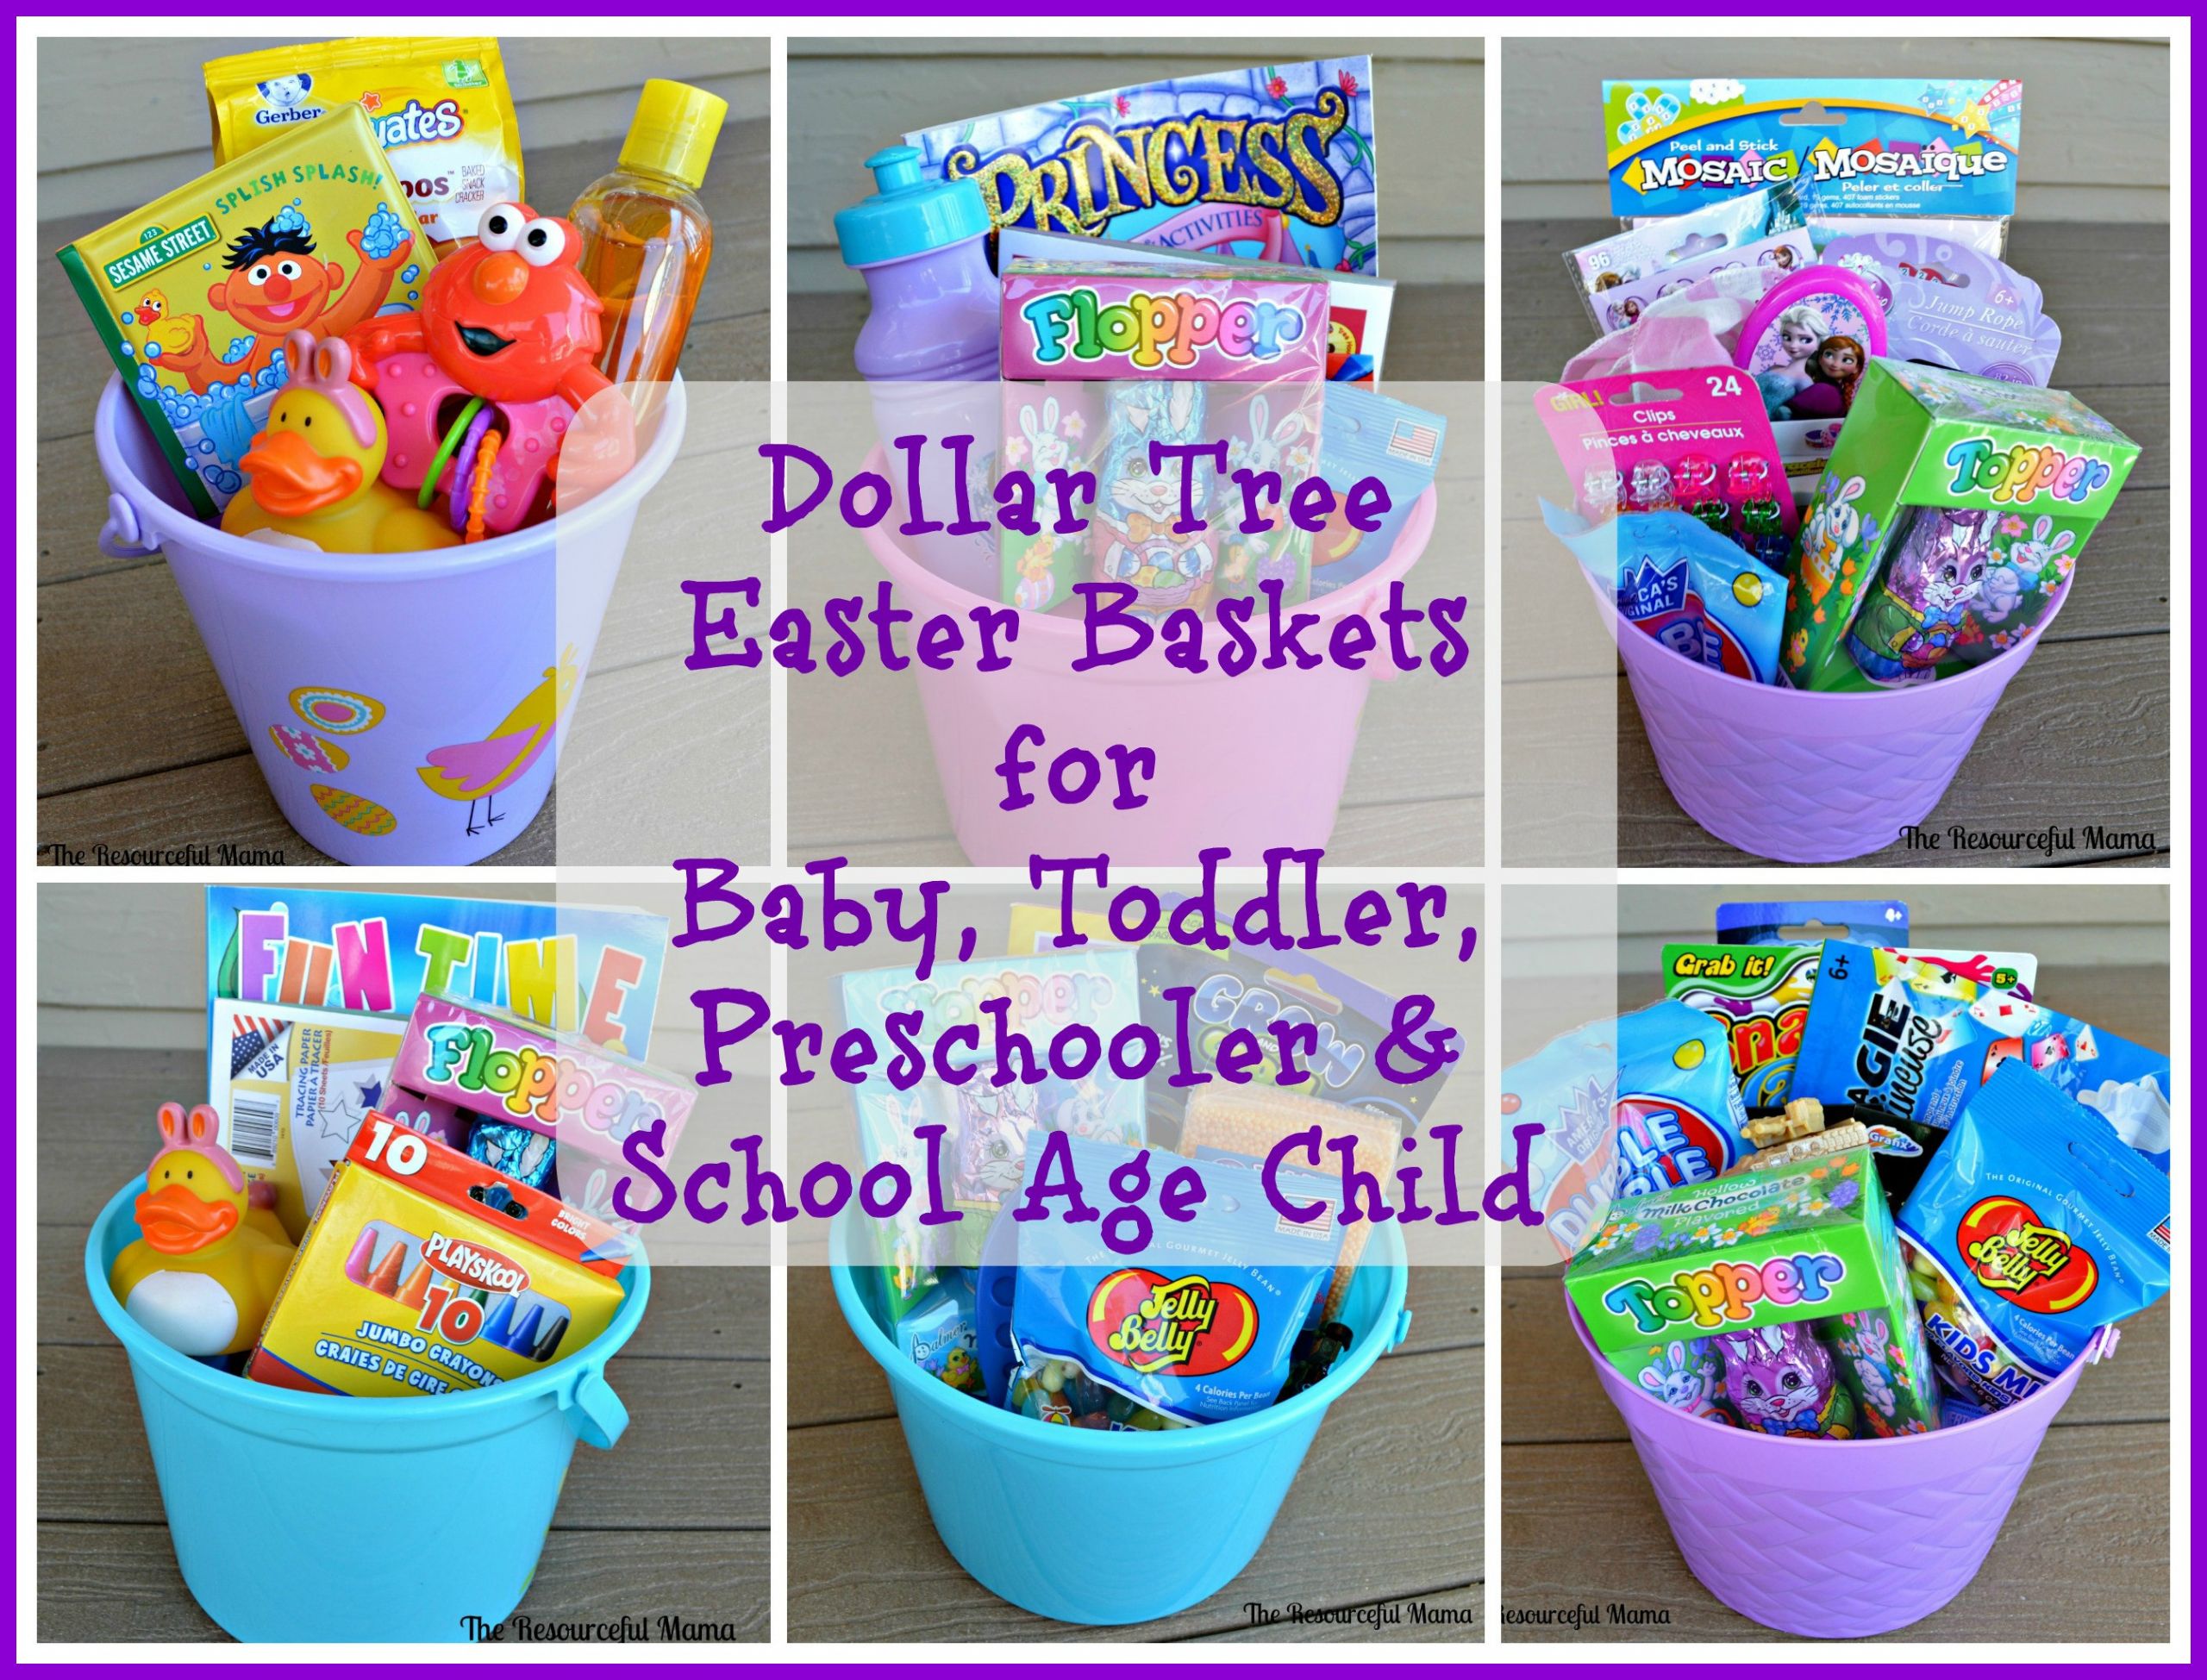 Small Easter Basket Ideas
 Dollar Tree Easter Baskets The Resourceful Mama